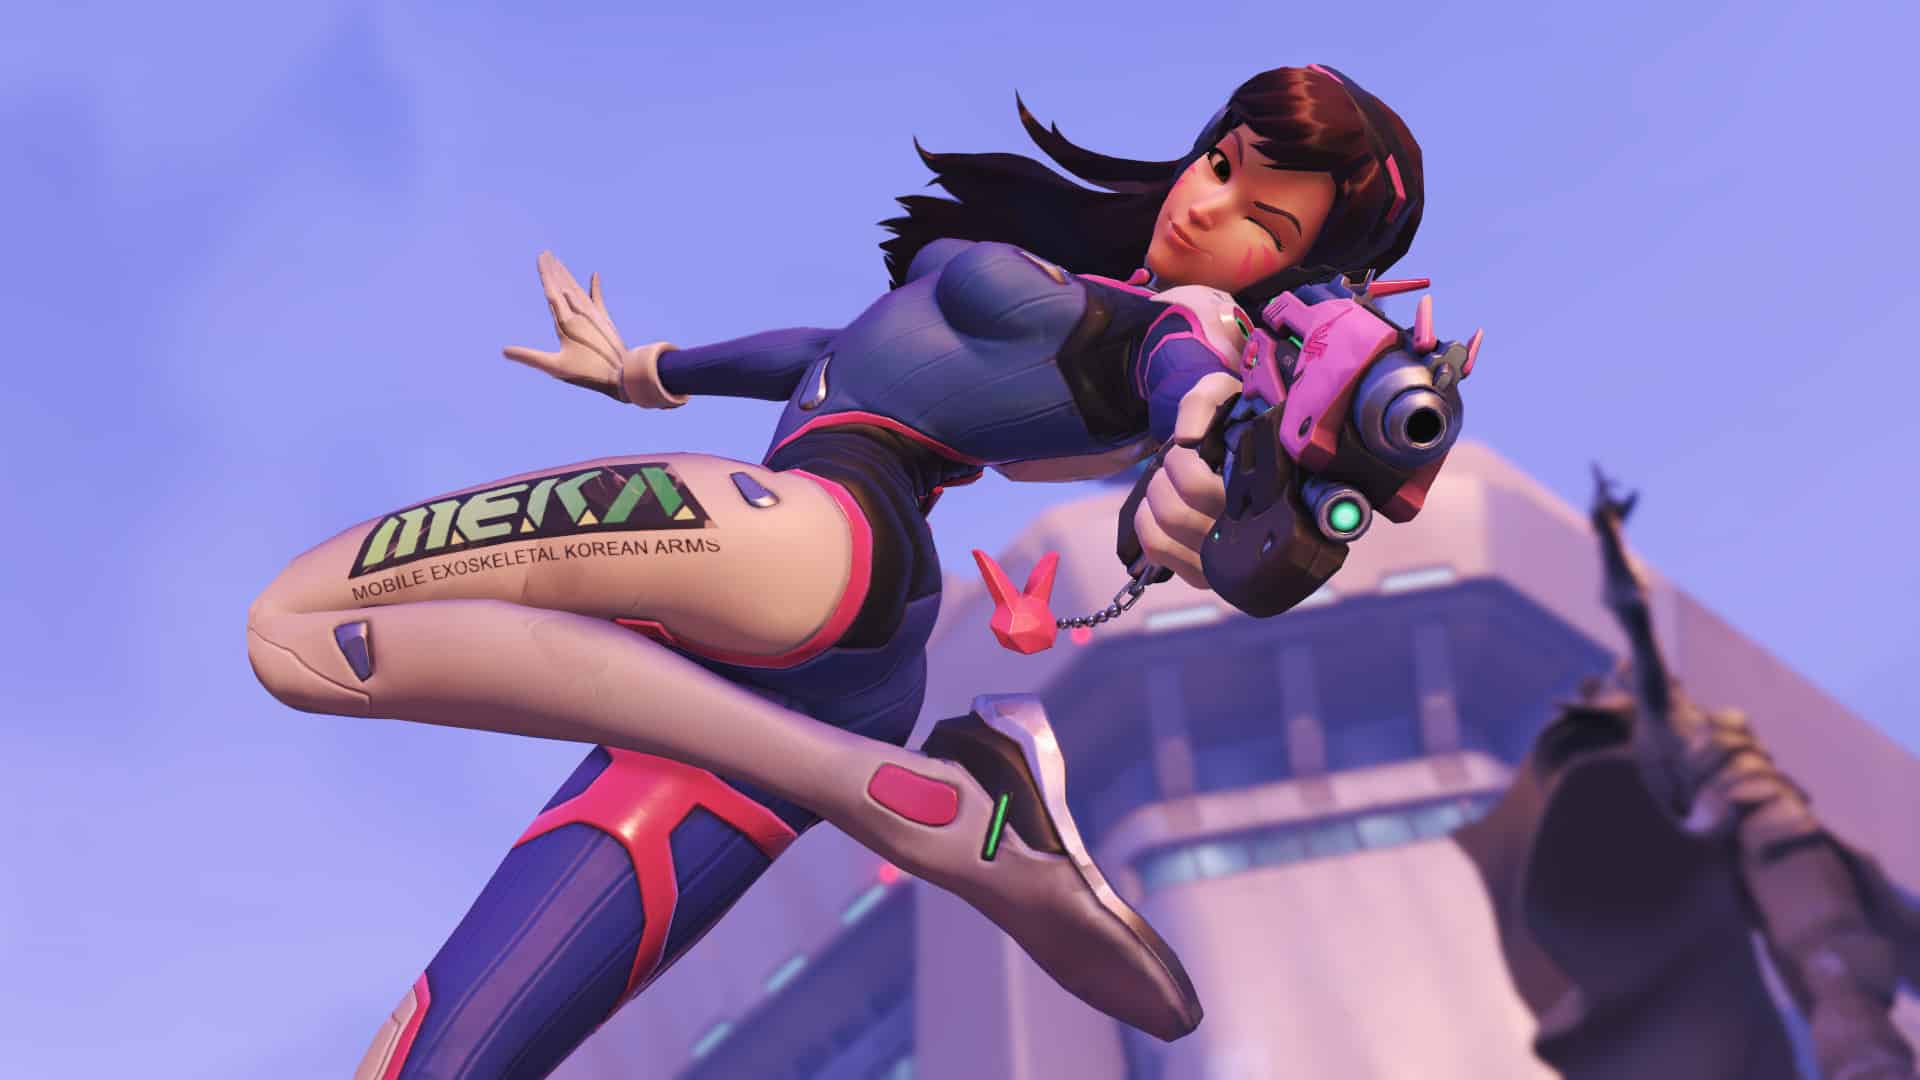 overwatch d.va out of meka shoots into camera